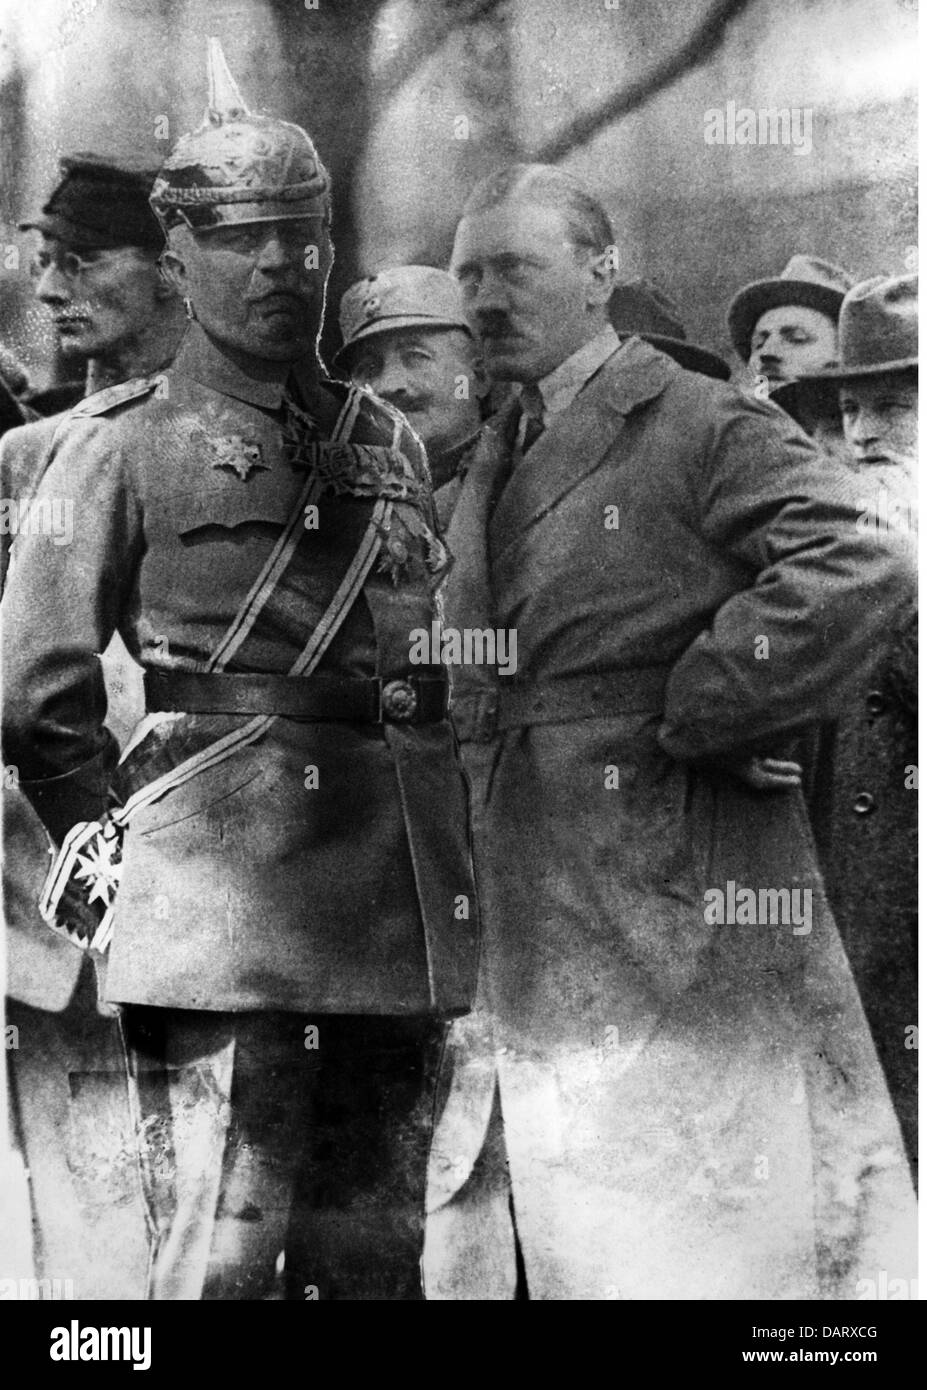 Nazism / National Socialism, propaganda, Adolf Hitler and general Erich Ludendorff, 'Deutscher Tag' 'German Day', Nuremberg, 1923, composite photograph, Additional-Rights-Clearences-Not Available Stock Photo